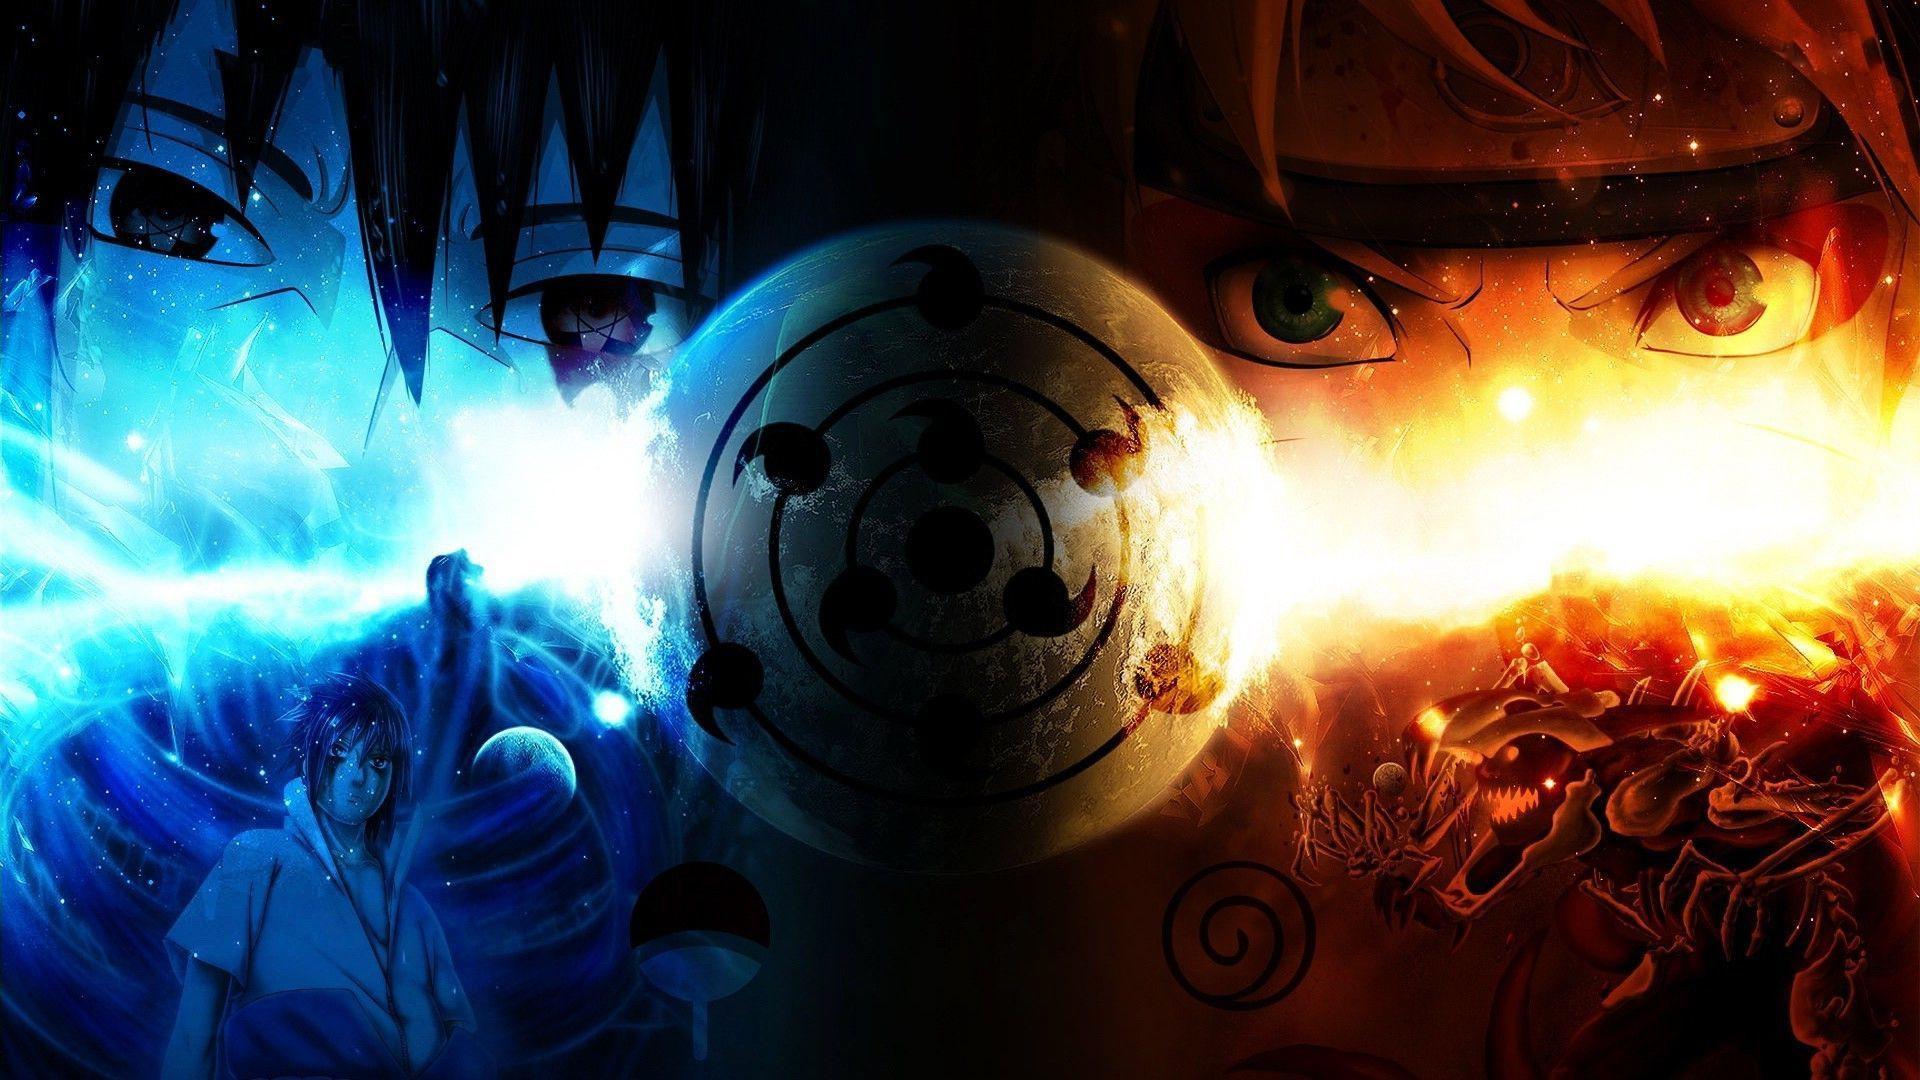 Free download Naruto Fire And Ice HD Anime Wallpaper Desktop